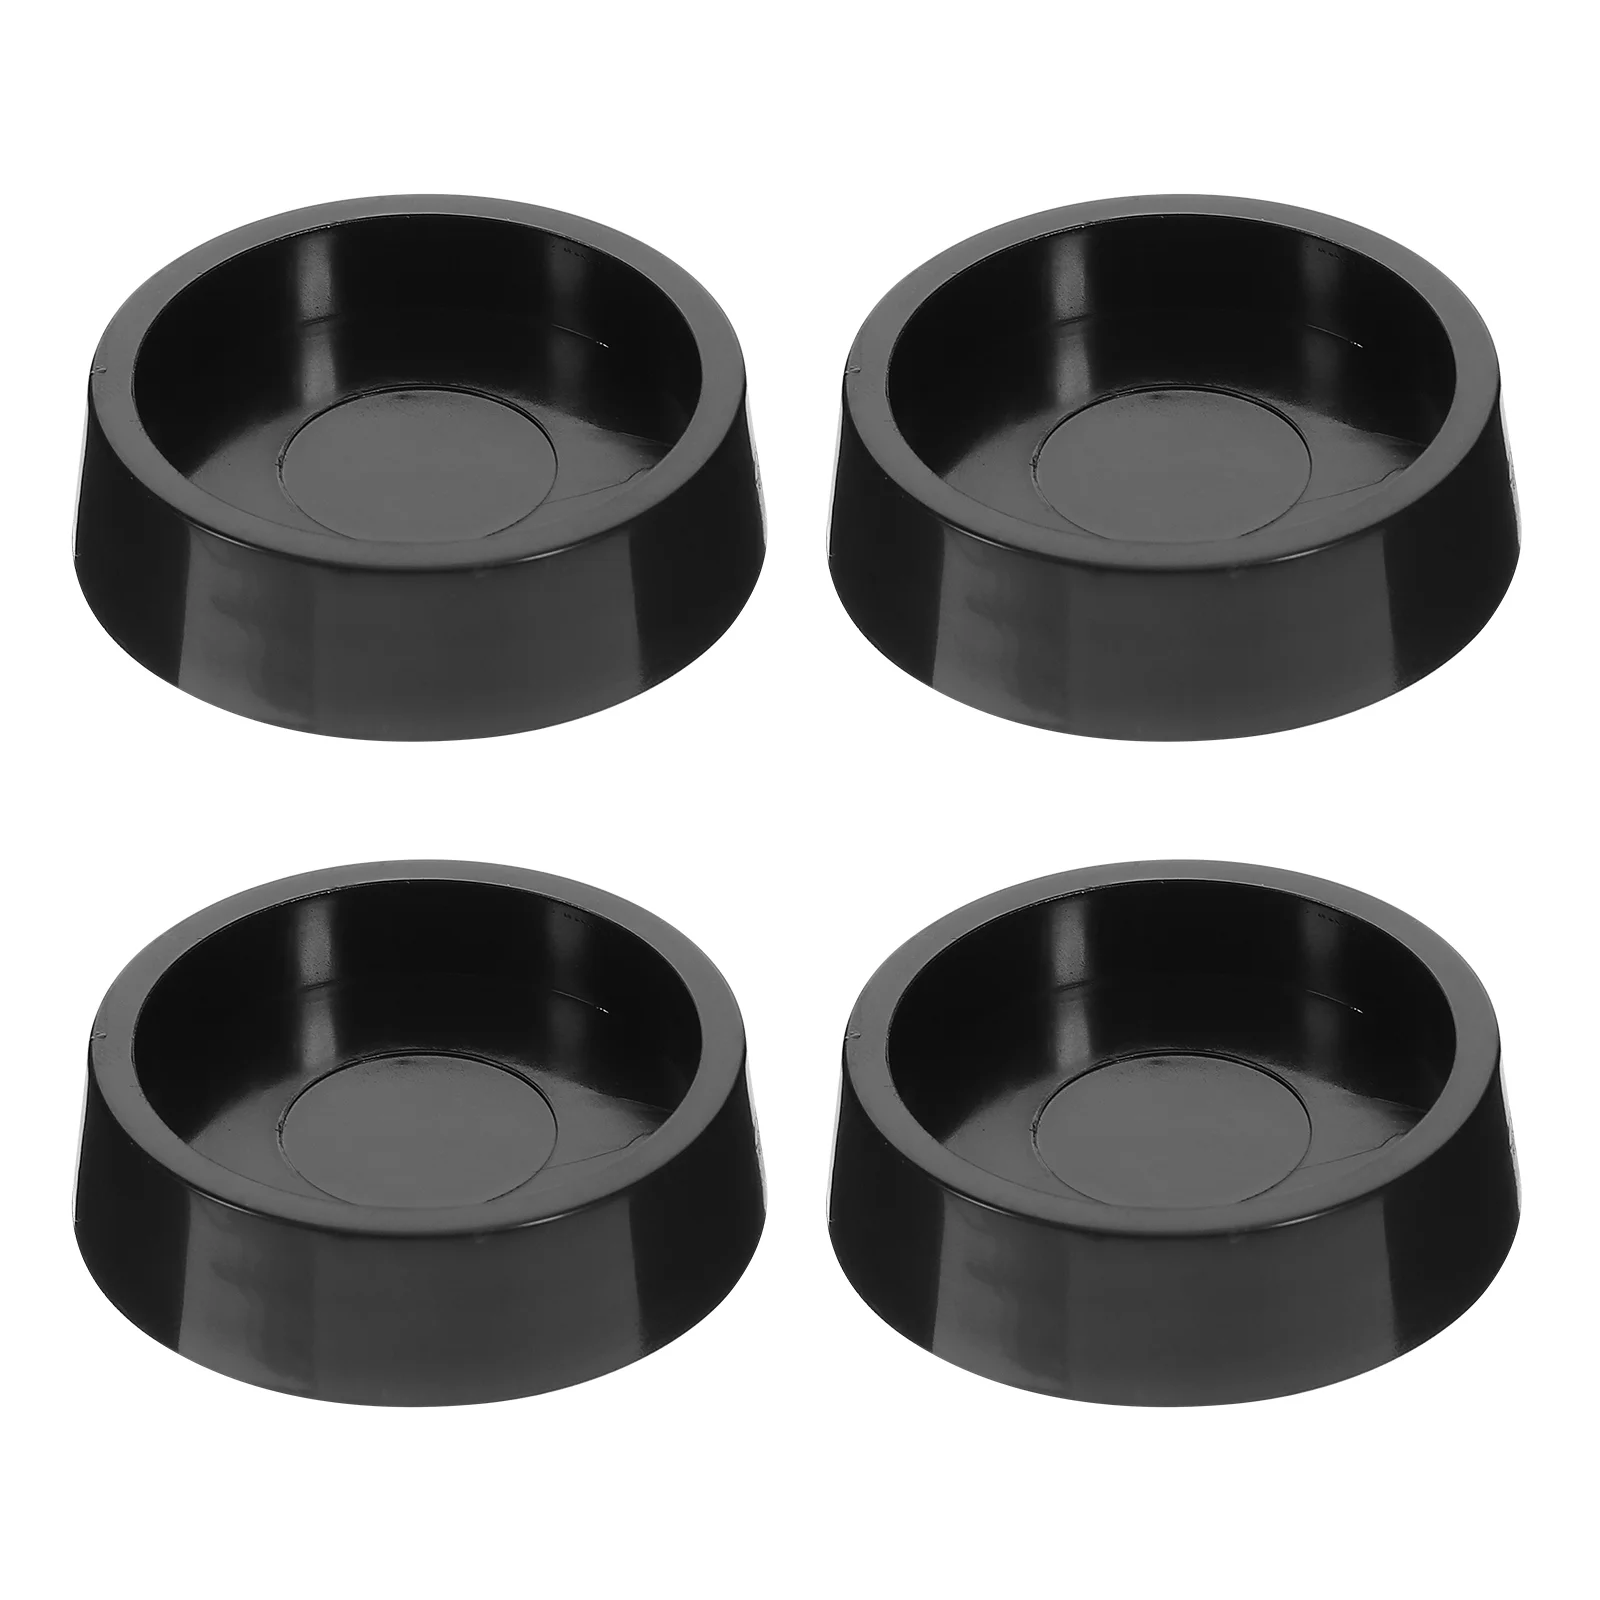 

4 Pcs Sofa Floor Mat Non Slip Rug Furniture Table Leg Plastic Baby Carriage Caster Wheel Stopper Bed bases and frames